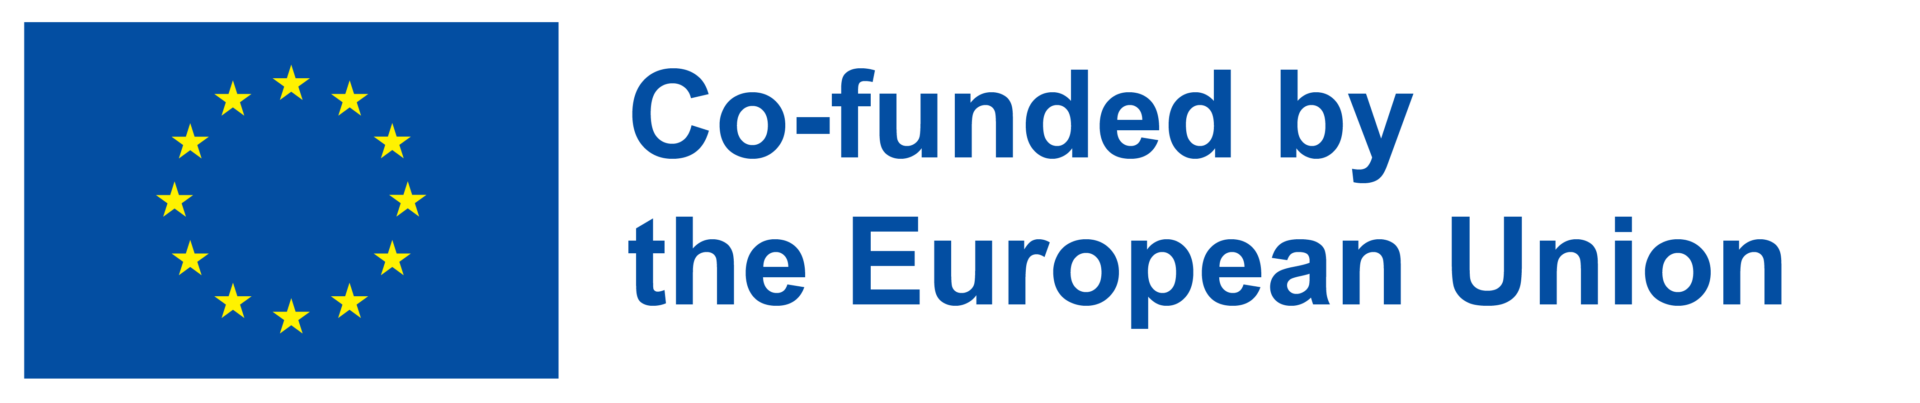 EU Project - Co-funded by the European Union